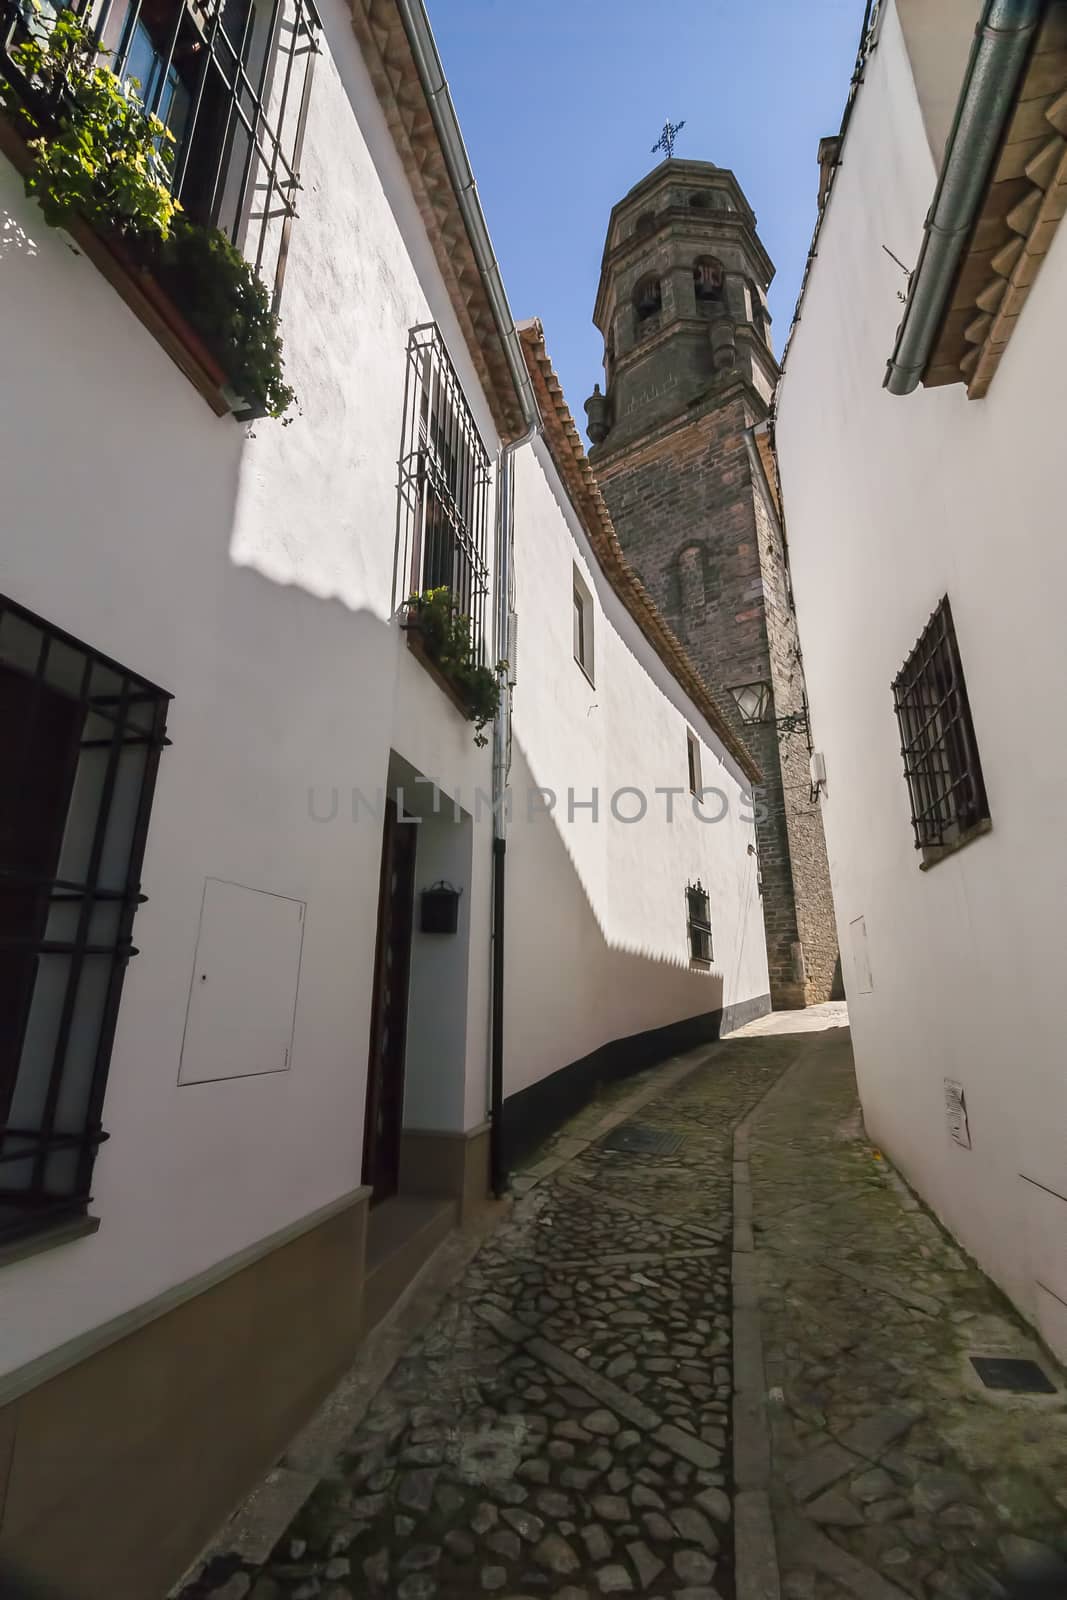 Very narrow street typical of Baeza, the fund for the cathedral in Baeza Jaen province, Andalucia, Spain